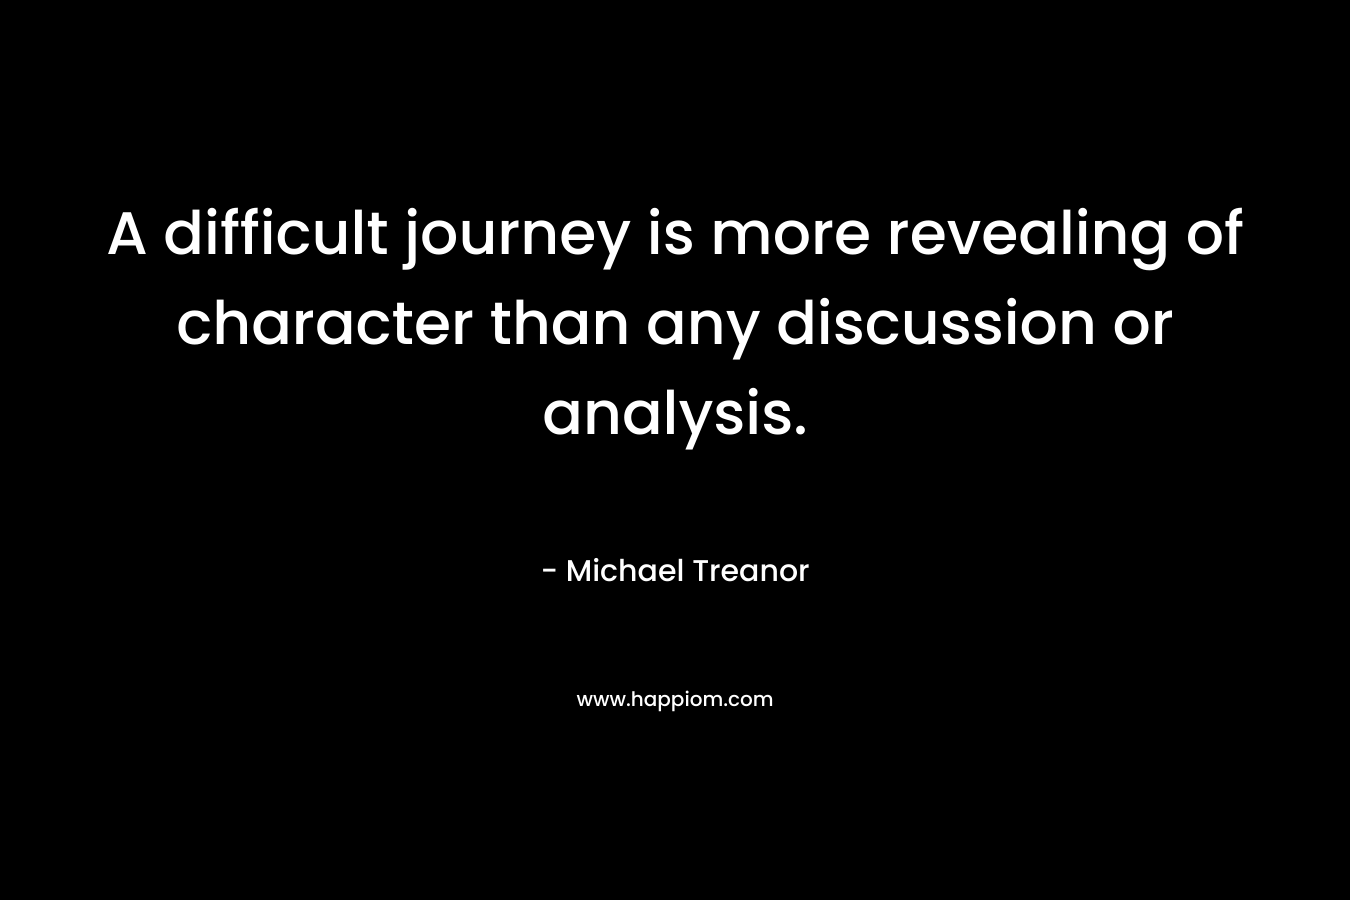 A difficult journey is more revealing of character than any discussion or analysis. – Michael Treanor